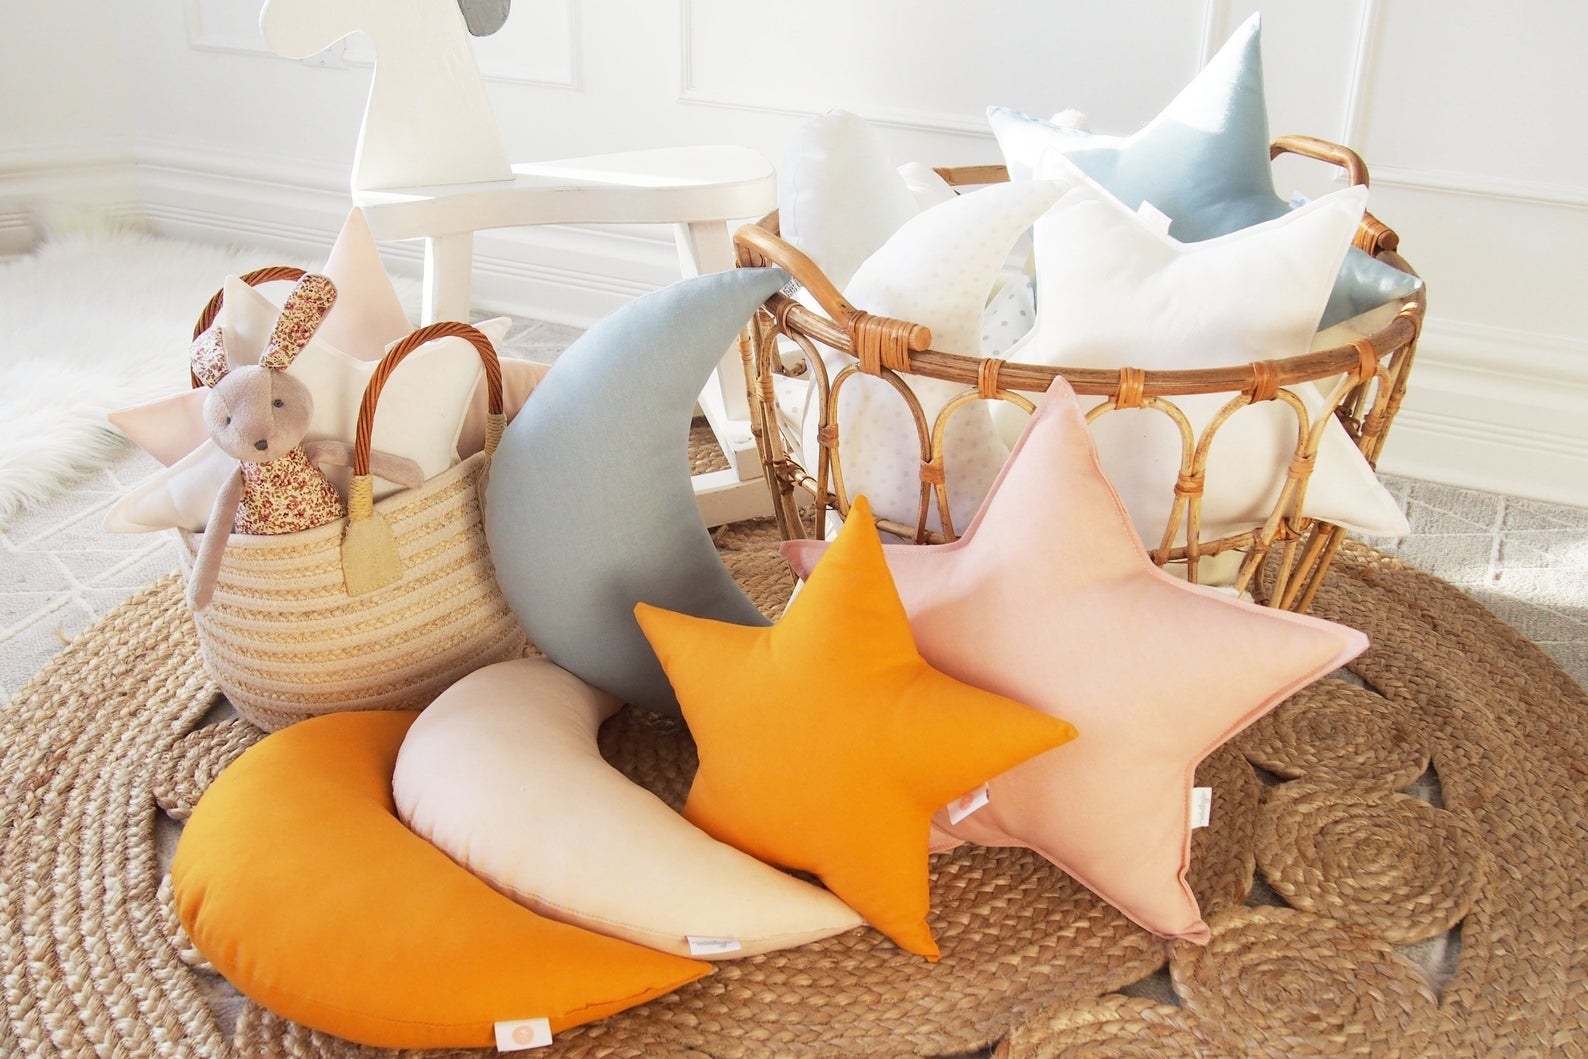 mix of star and moon pillows on a rug and in a basket